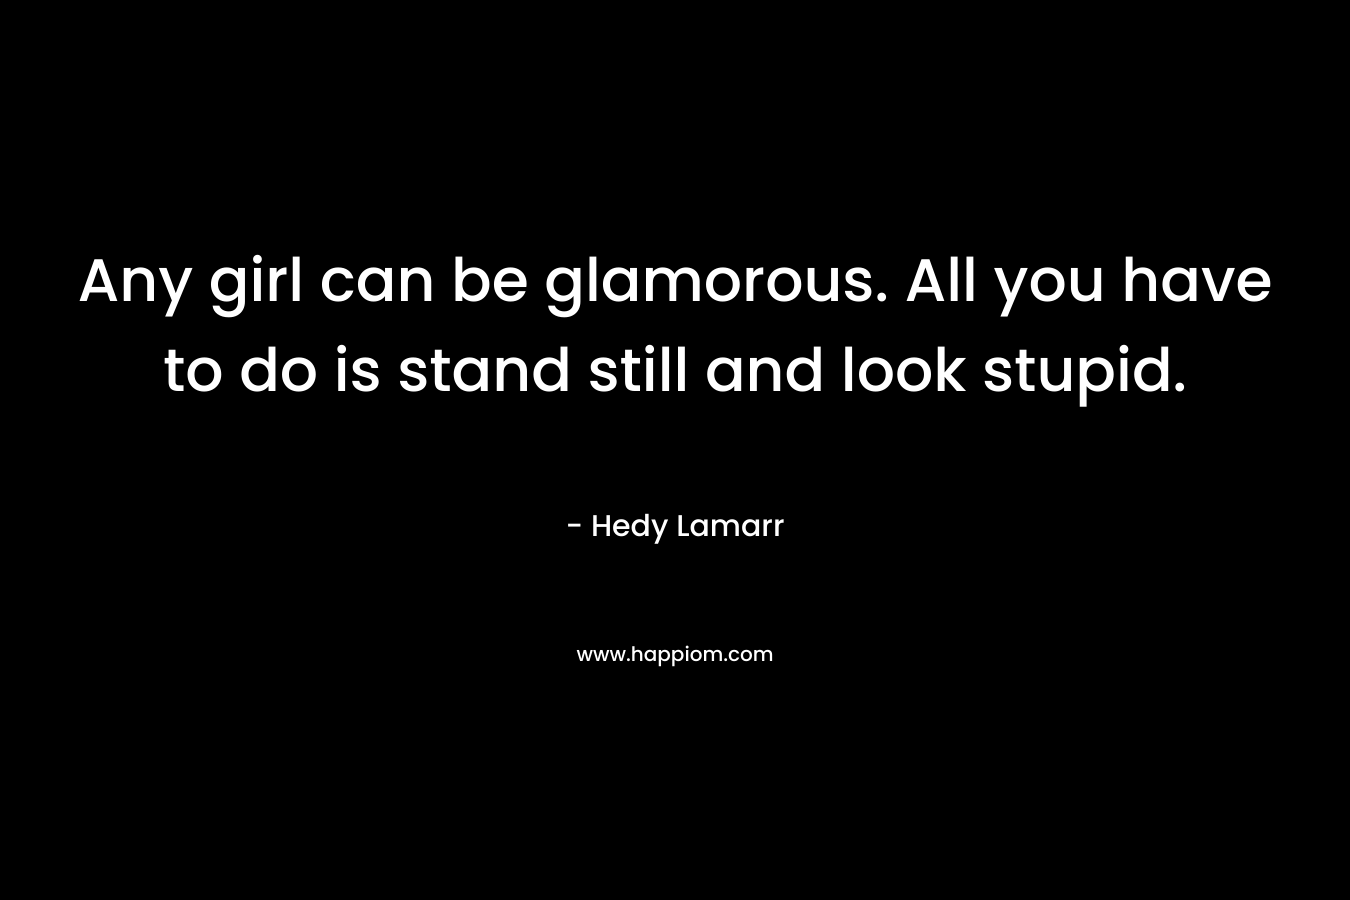 Any girl can be glamorous. All you have to do is stand still and look stupid. – Hedy Lamarr